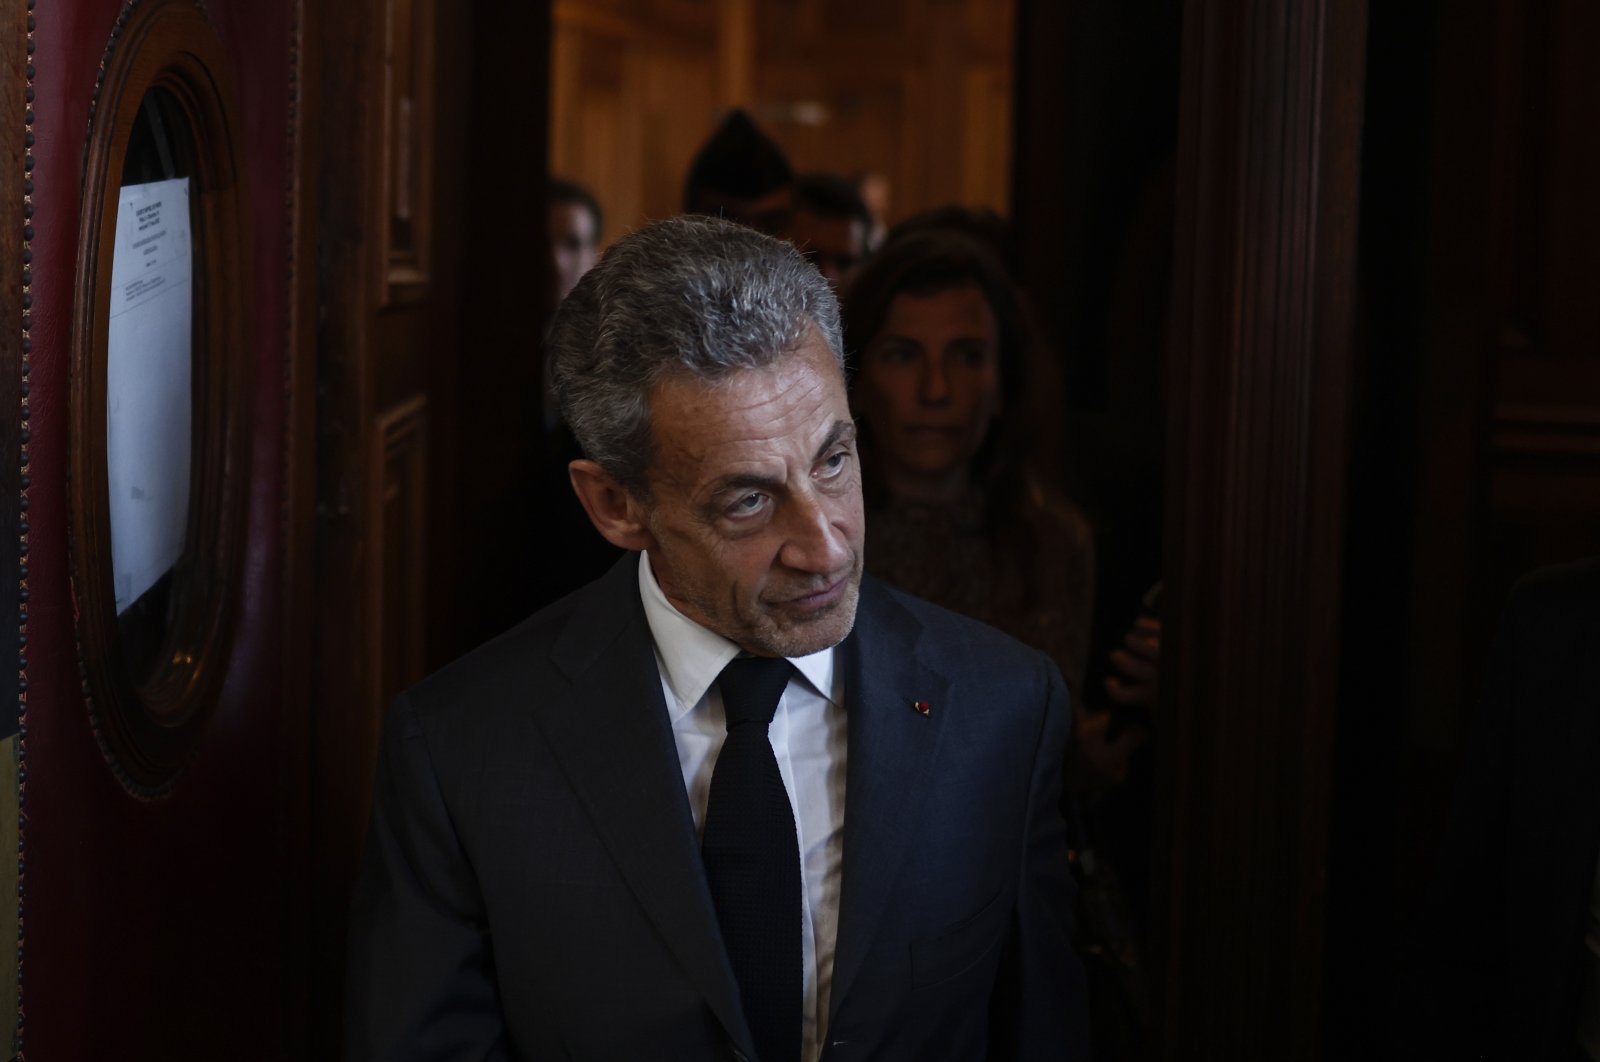 Former French President Nicolas Sarkozy exits the courthouse after an appeal court upheld his corruption conviction, Paris, France, May 17, 2023. (EPA Photo)